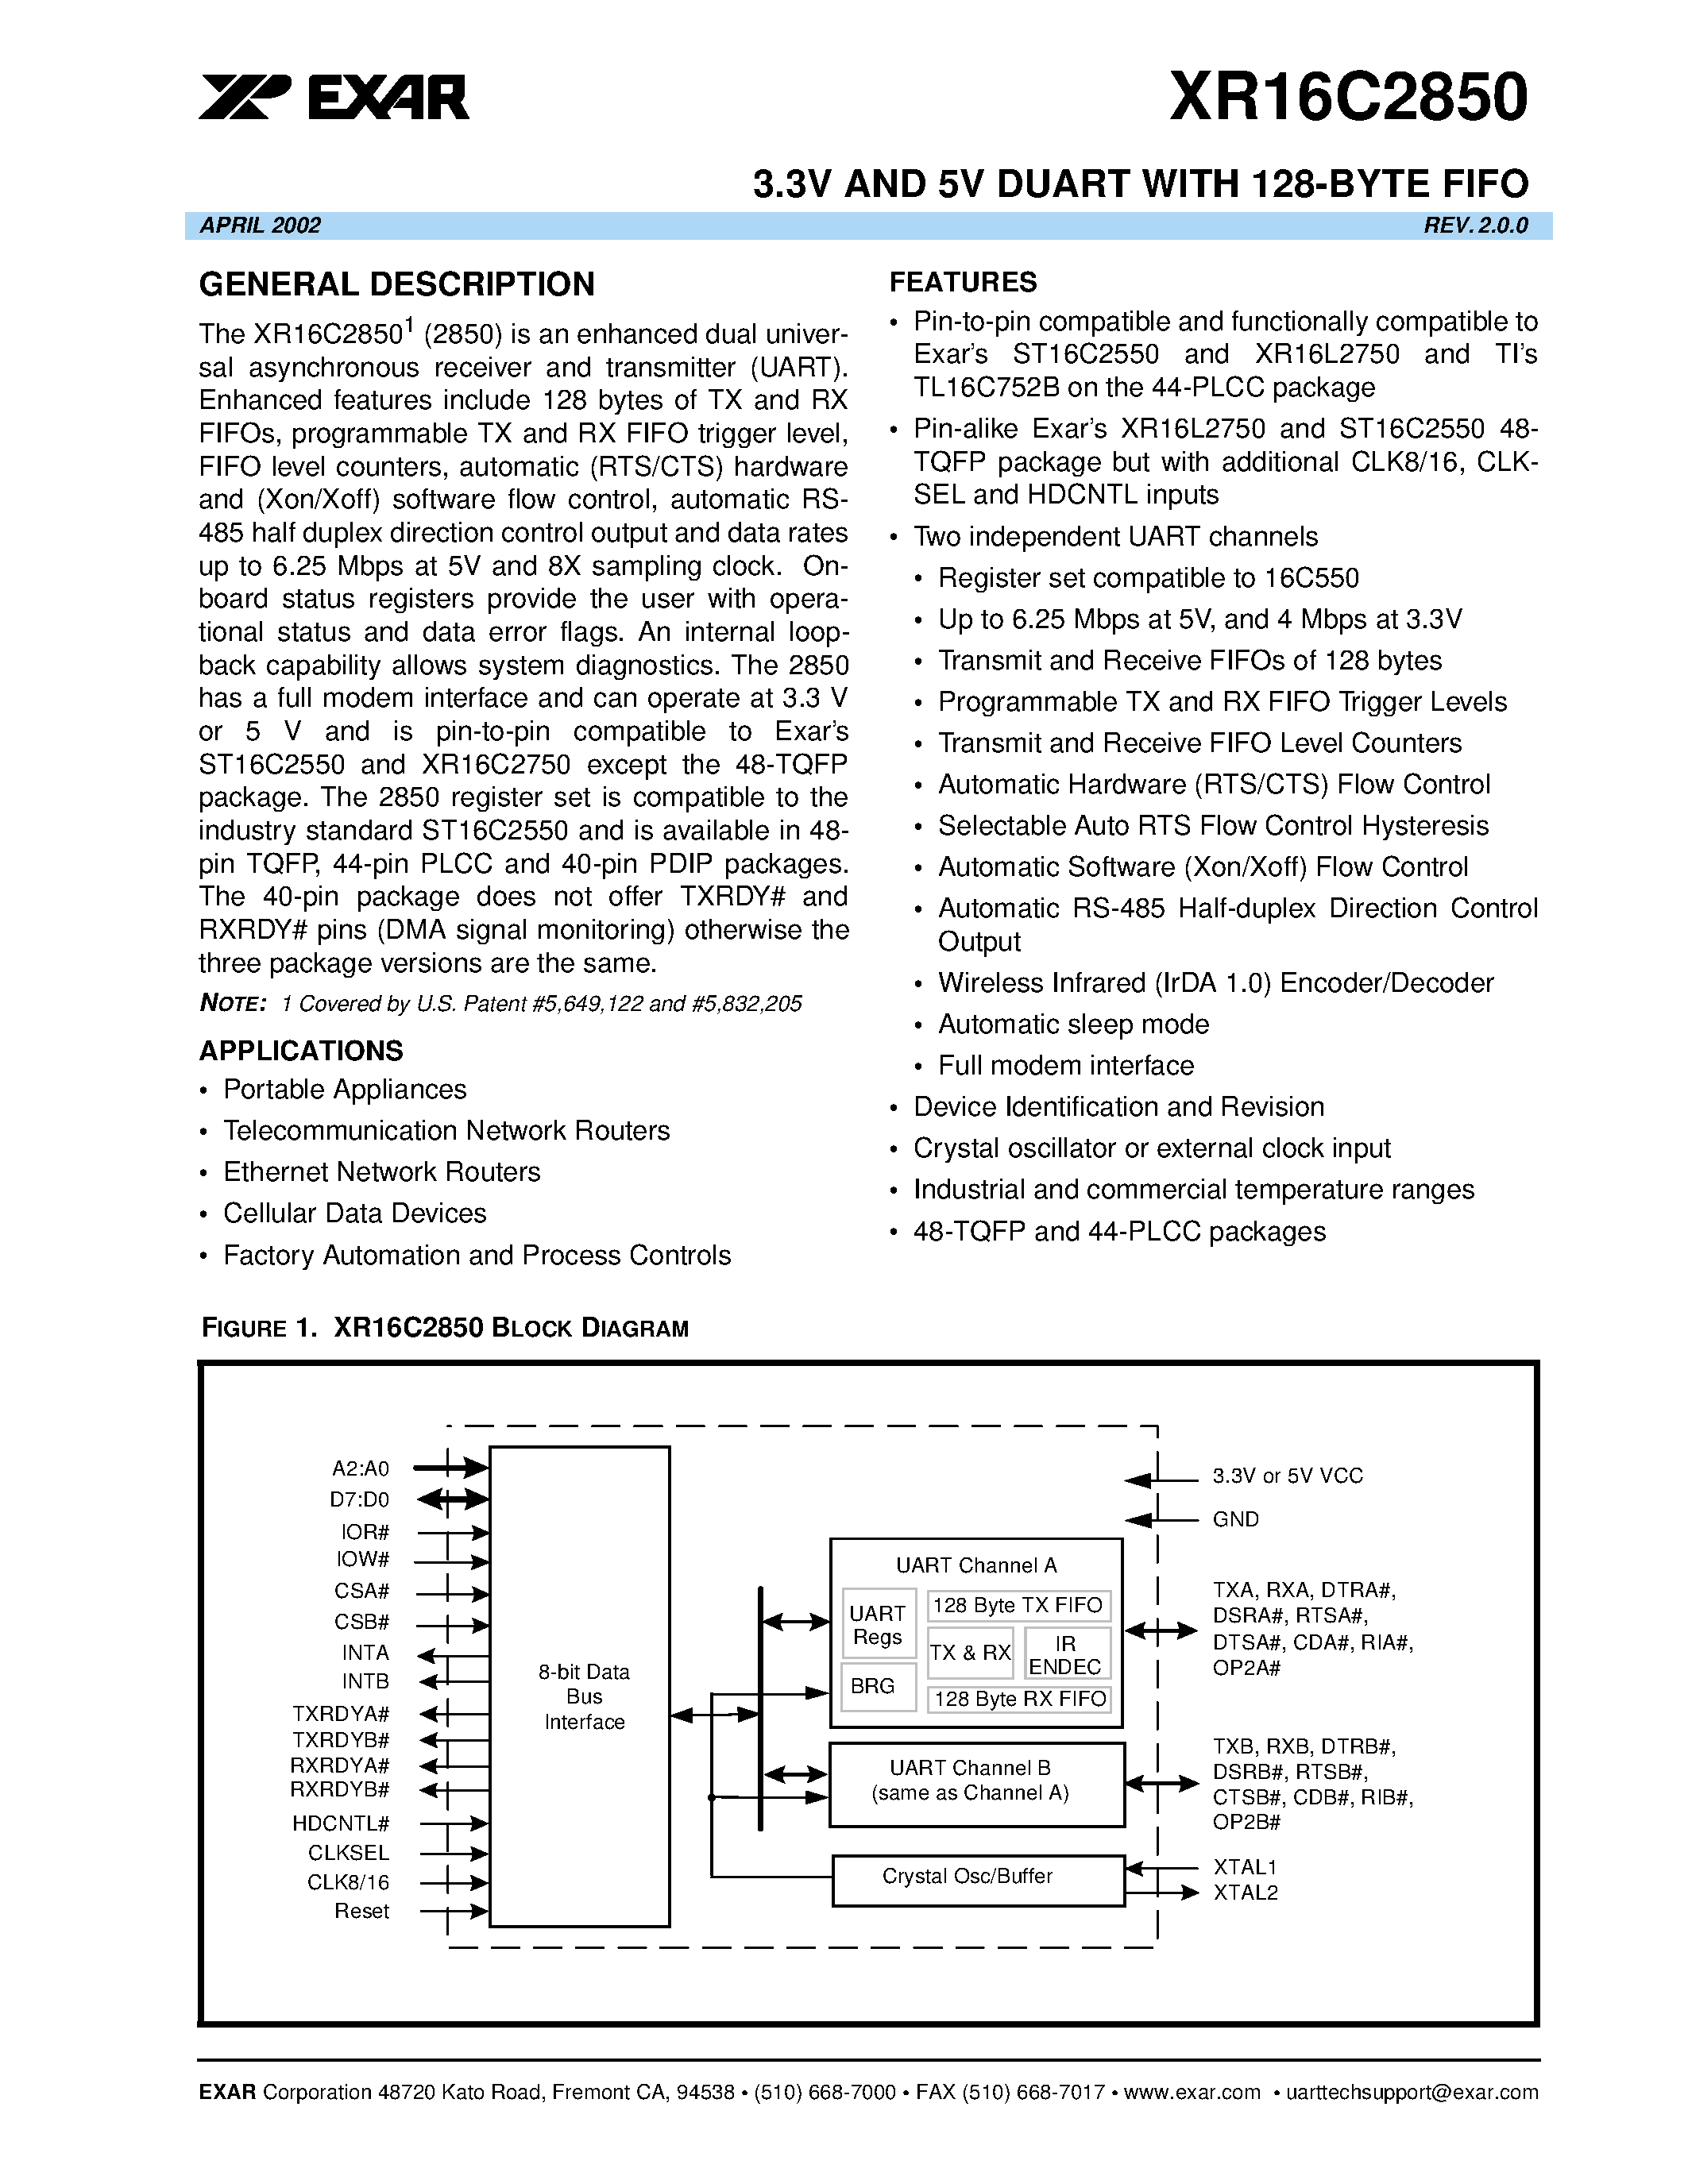 Datasheet XR16C2850IJ44 - 3.3V AND 5V DUART WITH 128-BYTE FIFO page 1